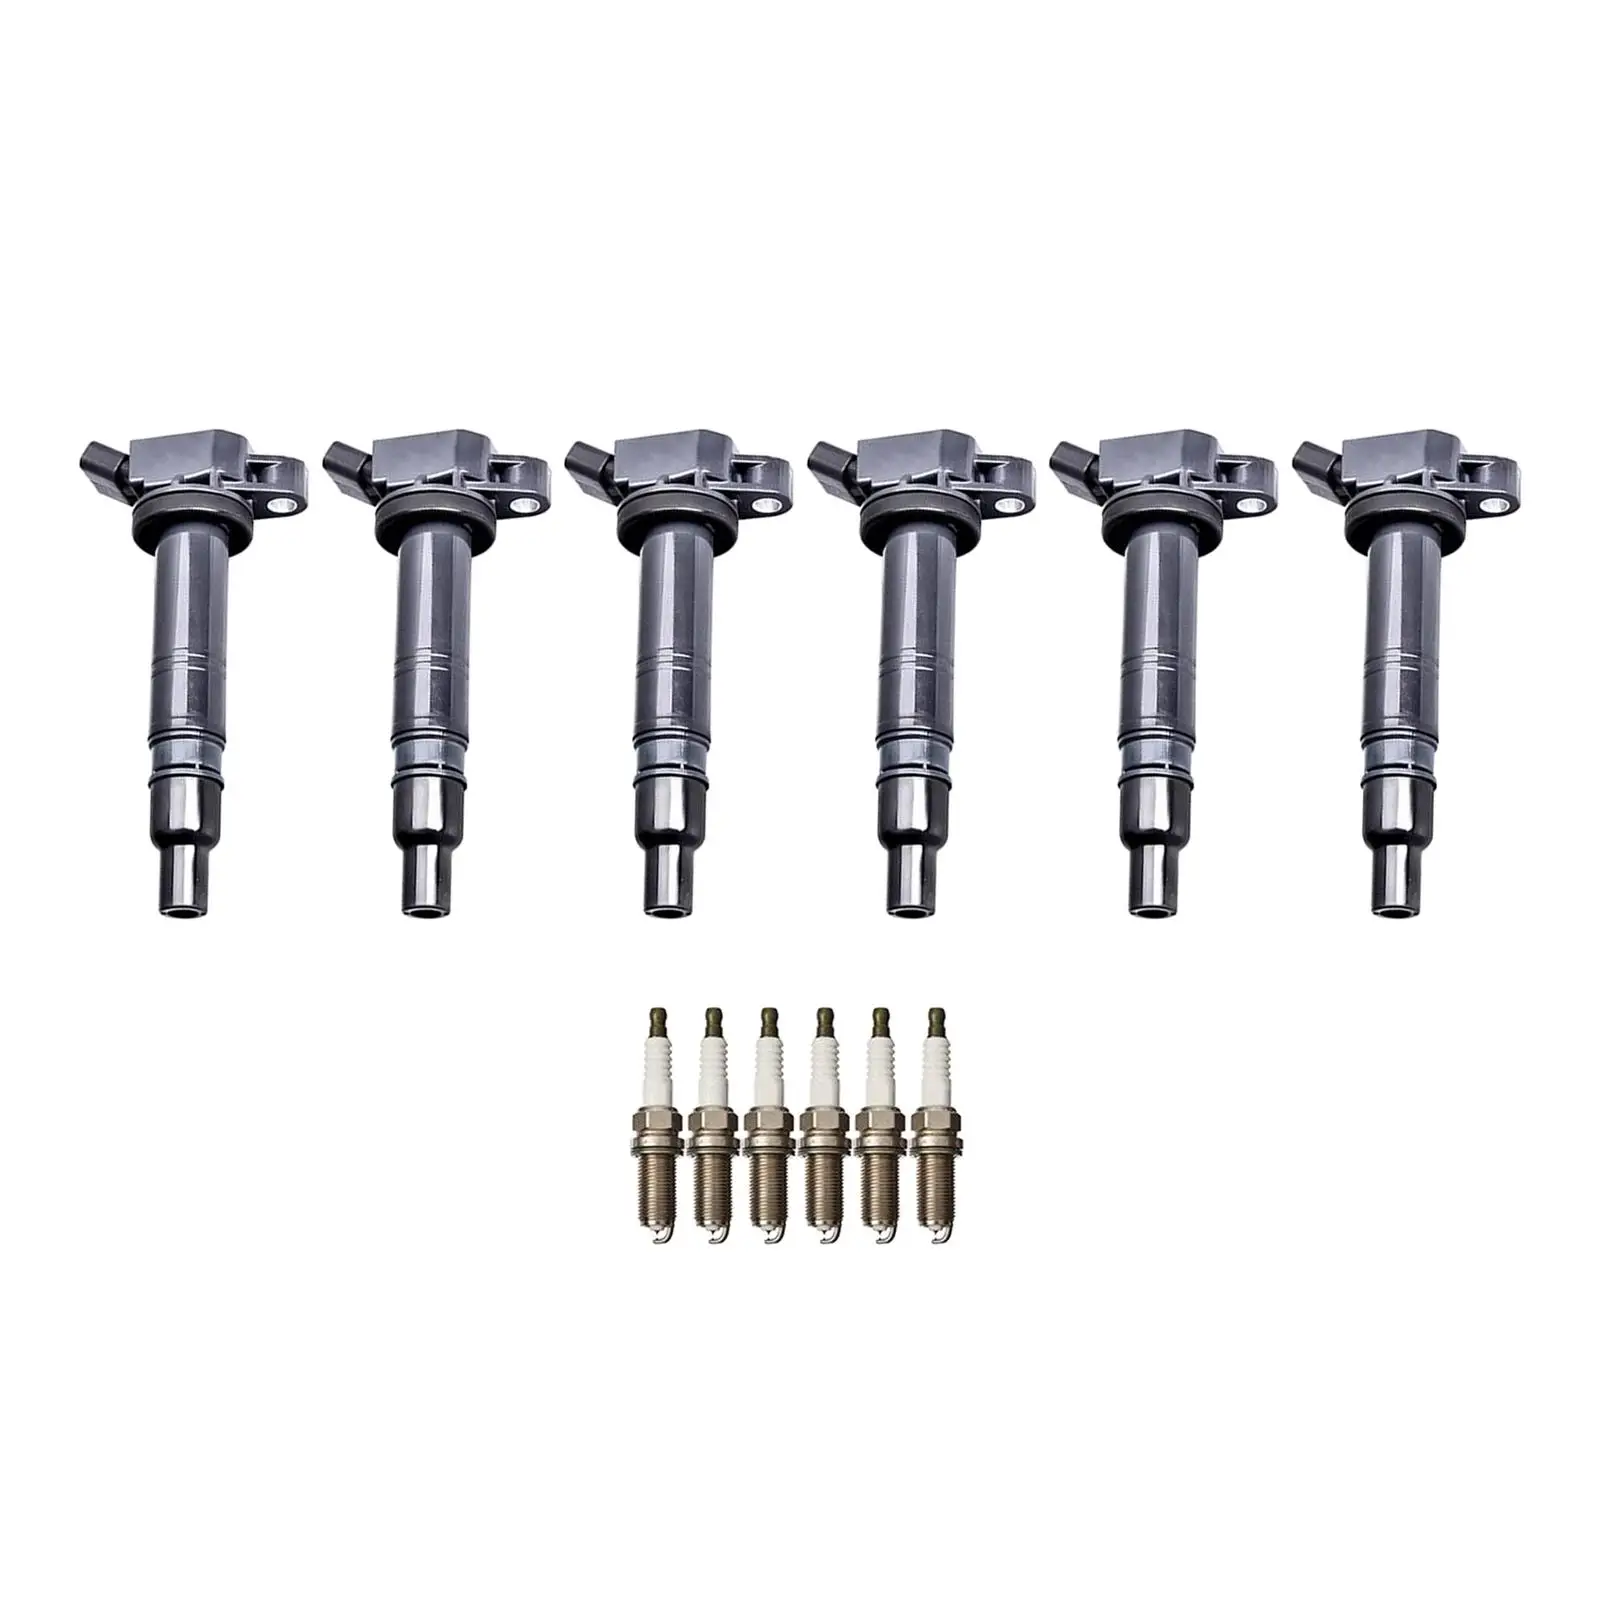 6 Ignition Coils 6 Iridium Spark Plugs for Toyota for tacoma 4 Runner